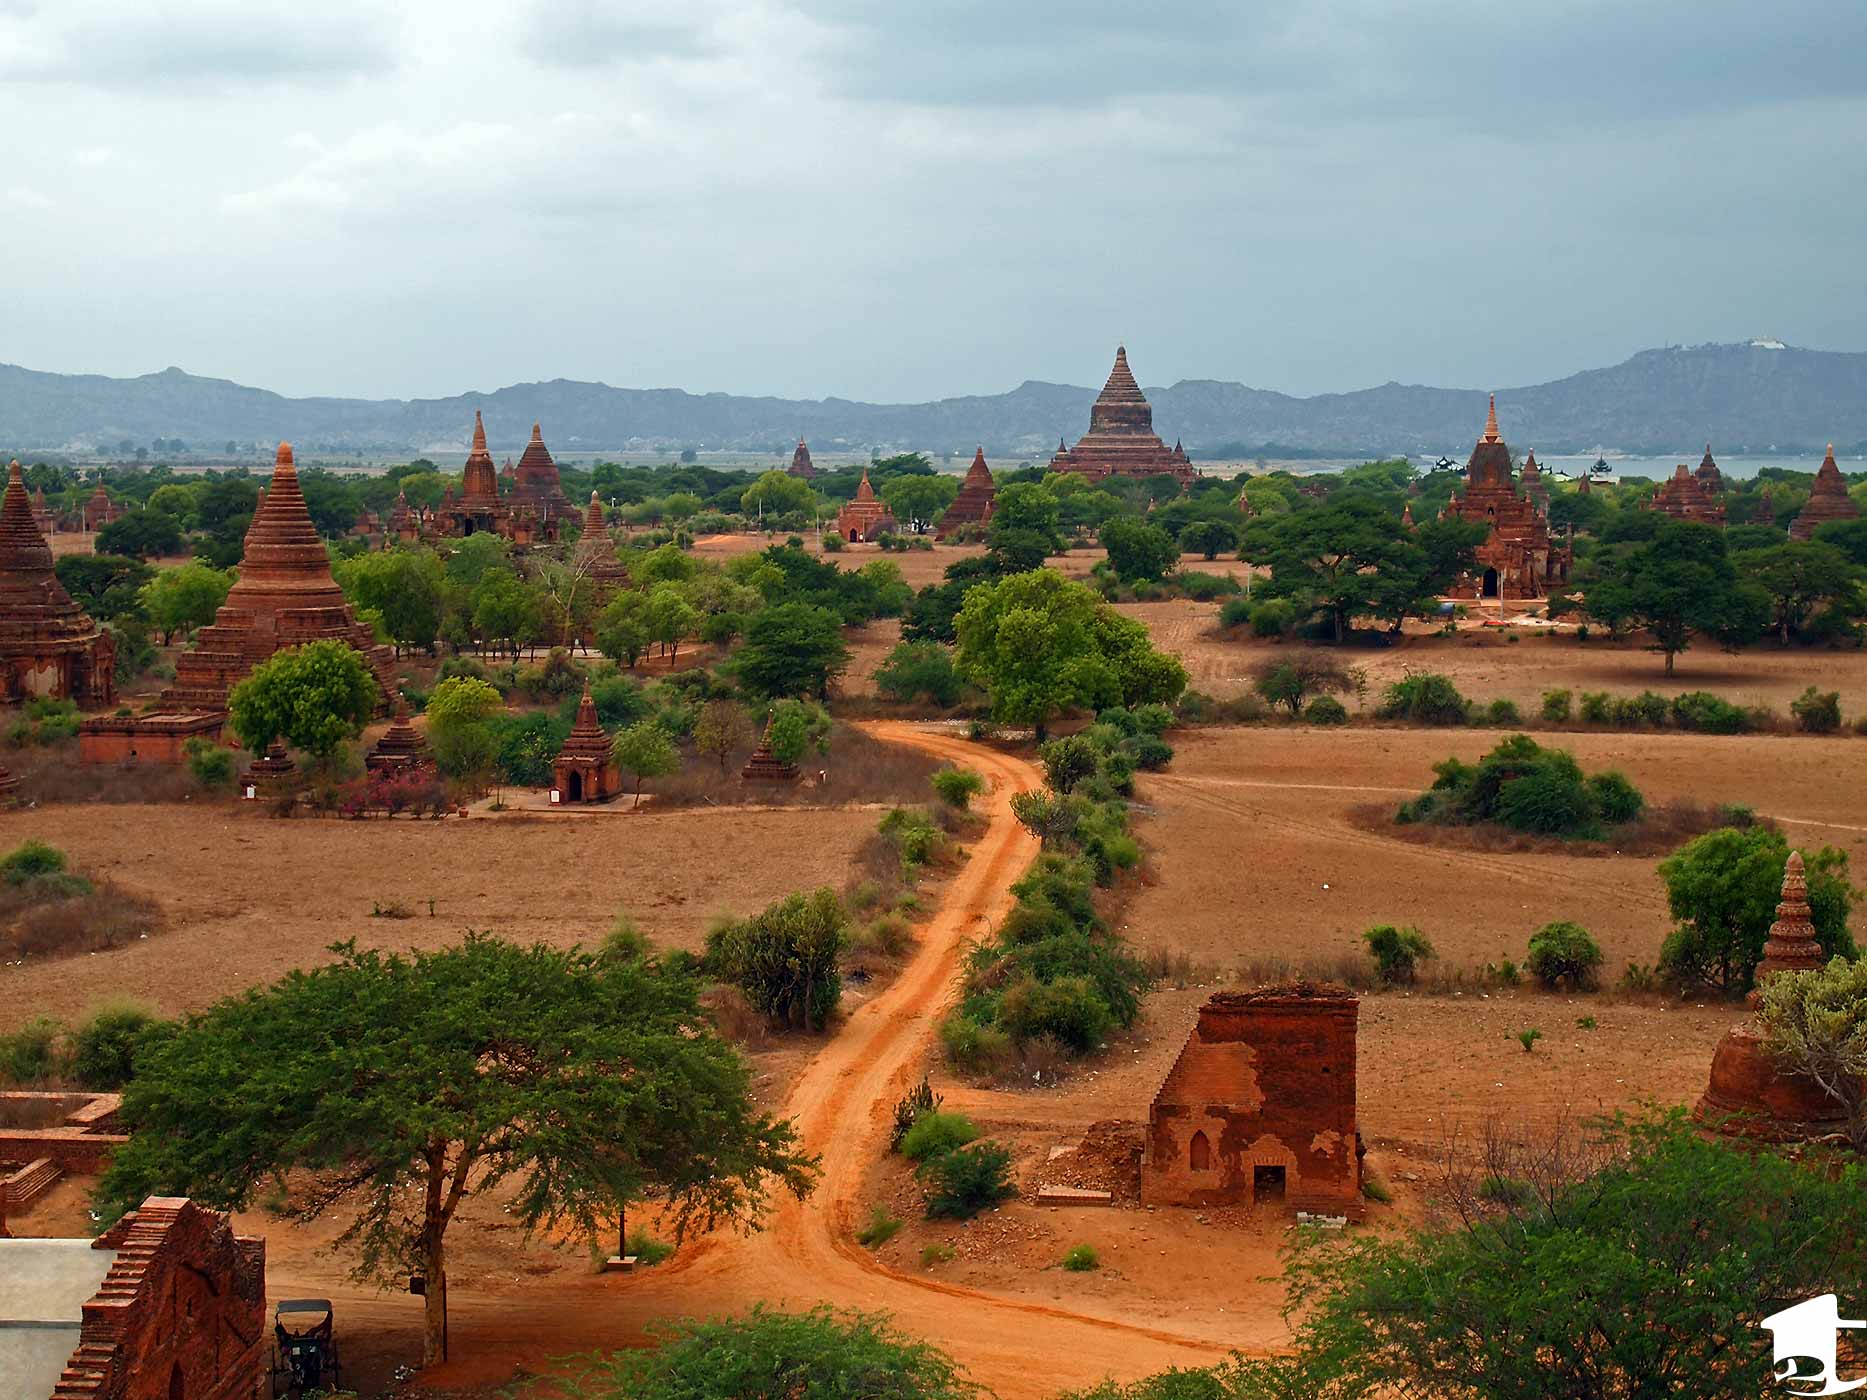 View of the Temples of Bagan